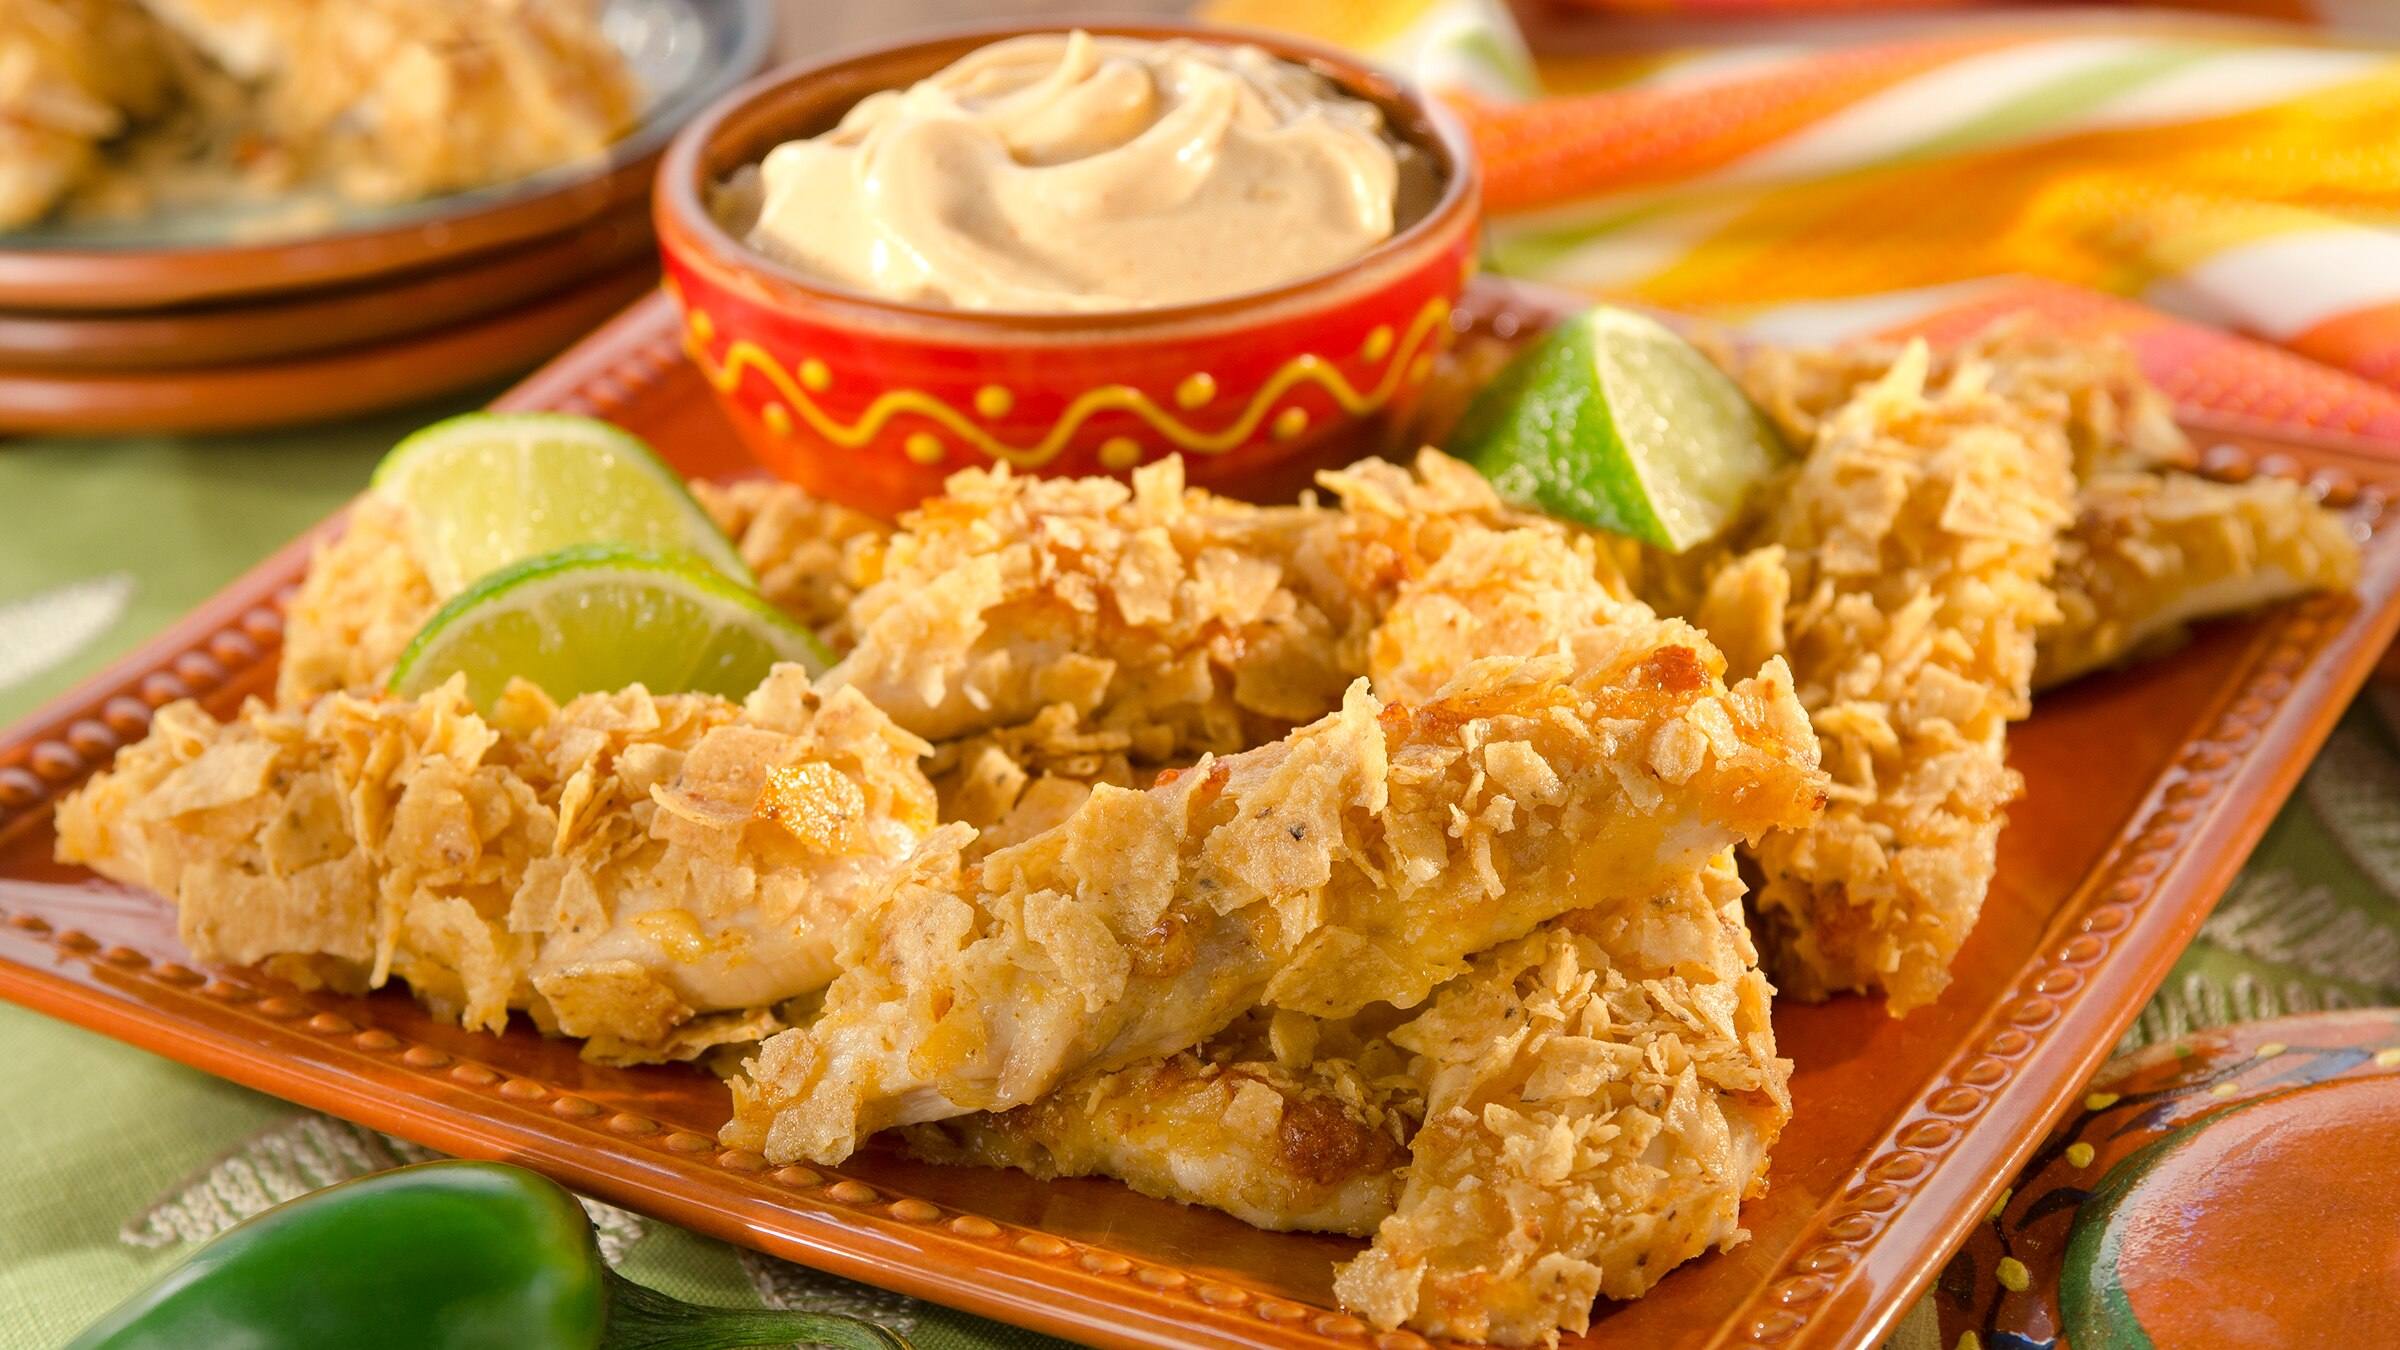 Chipotle-Lime Crusted Chicken Tenders